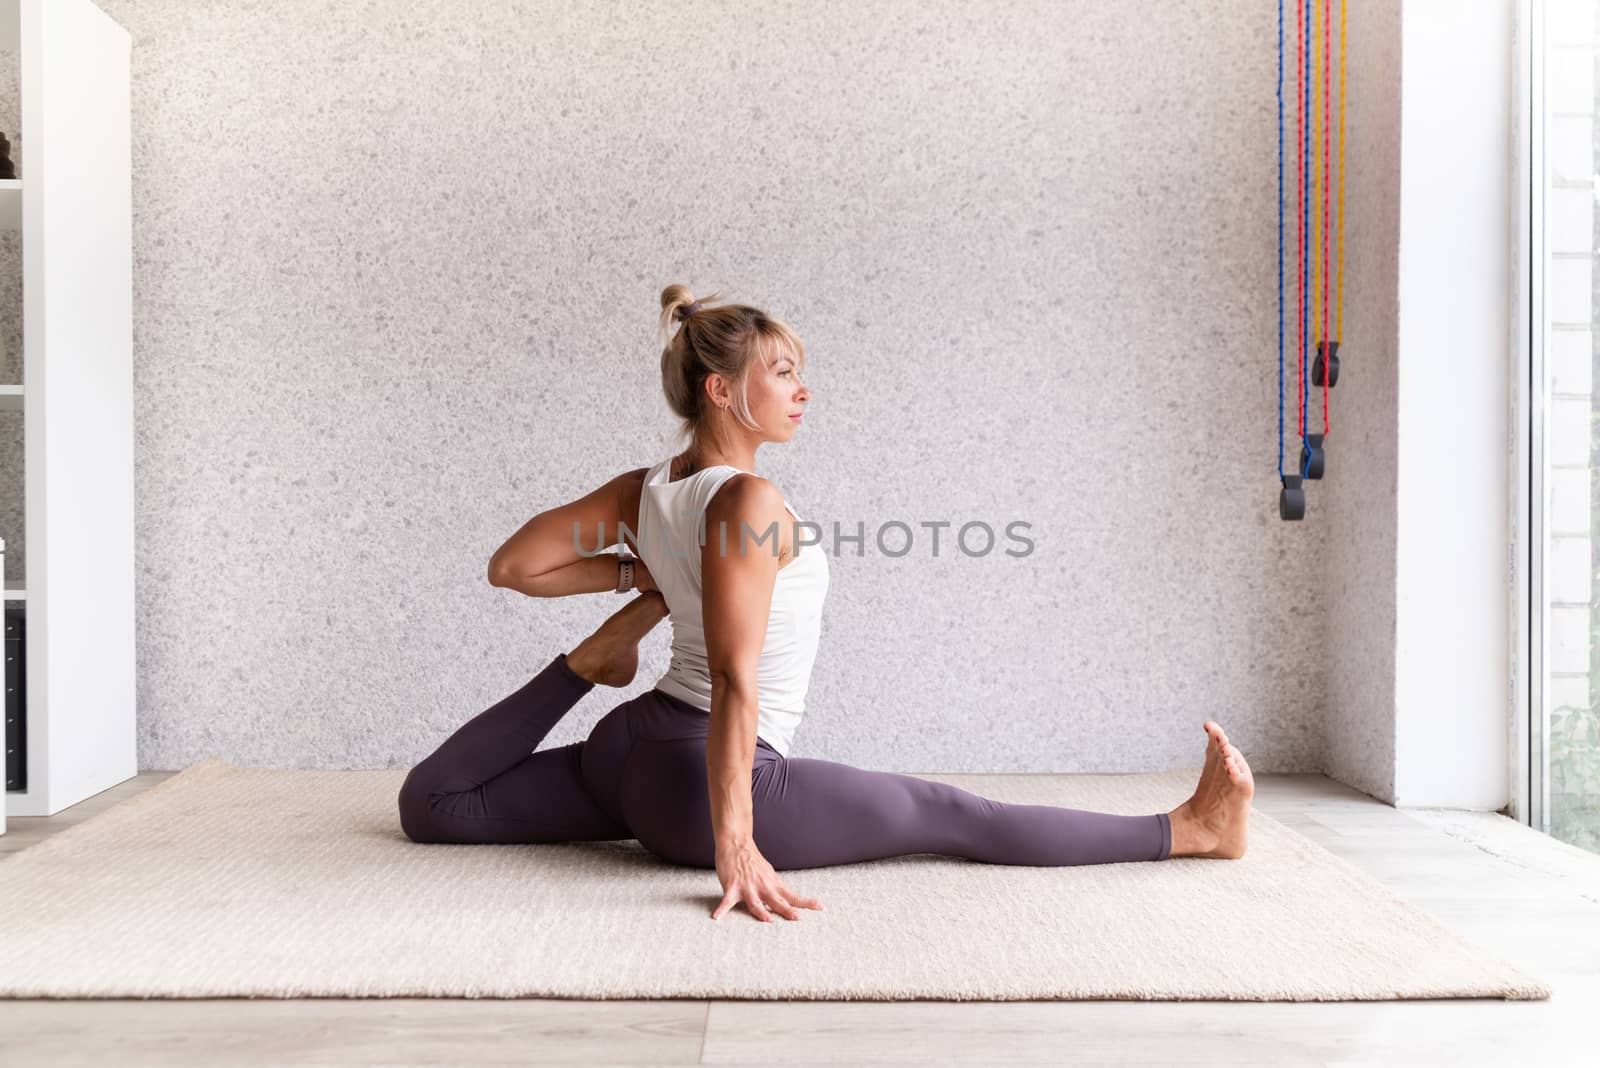 Healthy lifestyle. Young attractive woman practicing yoga, wearing sportswear, white shirt and purple pants, indoor full length, gray background